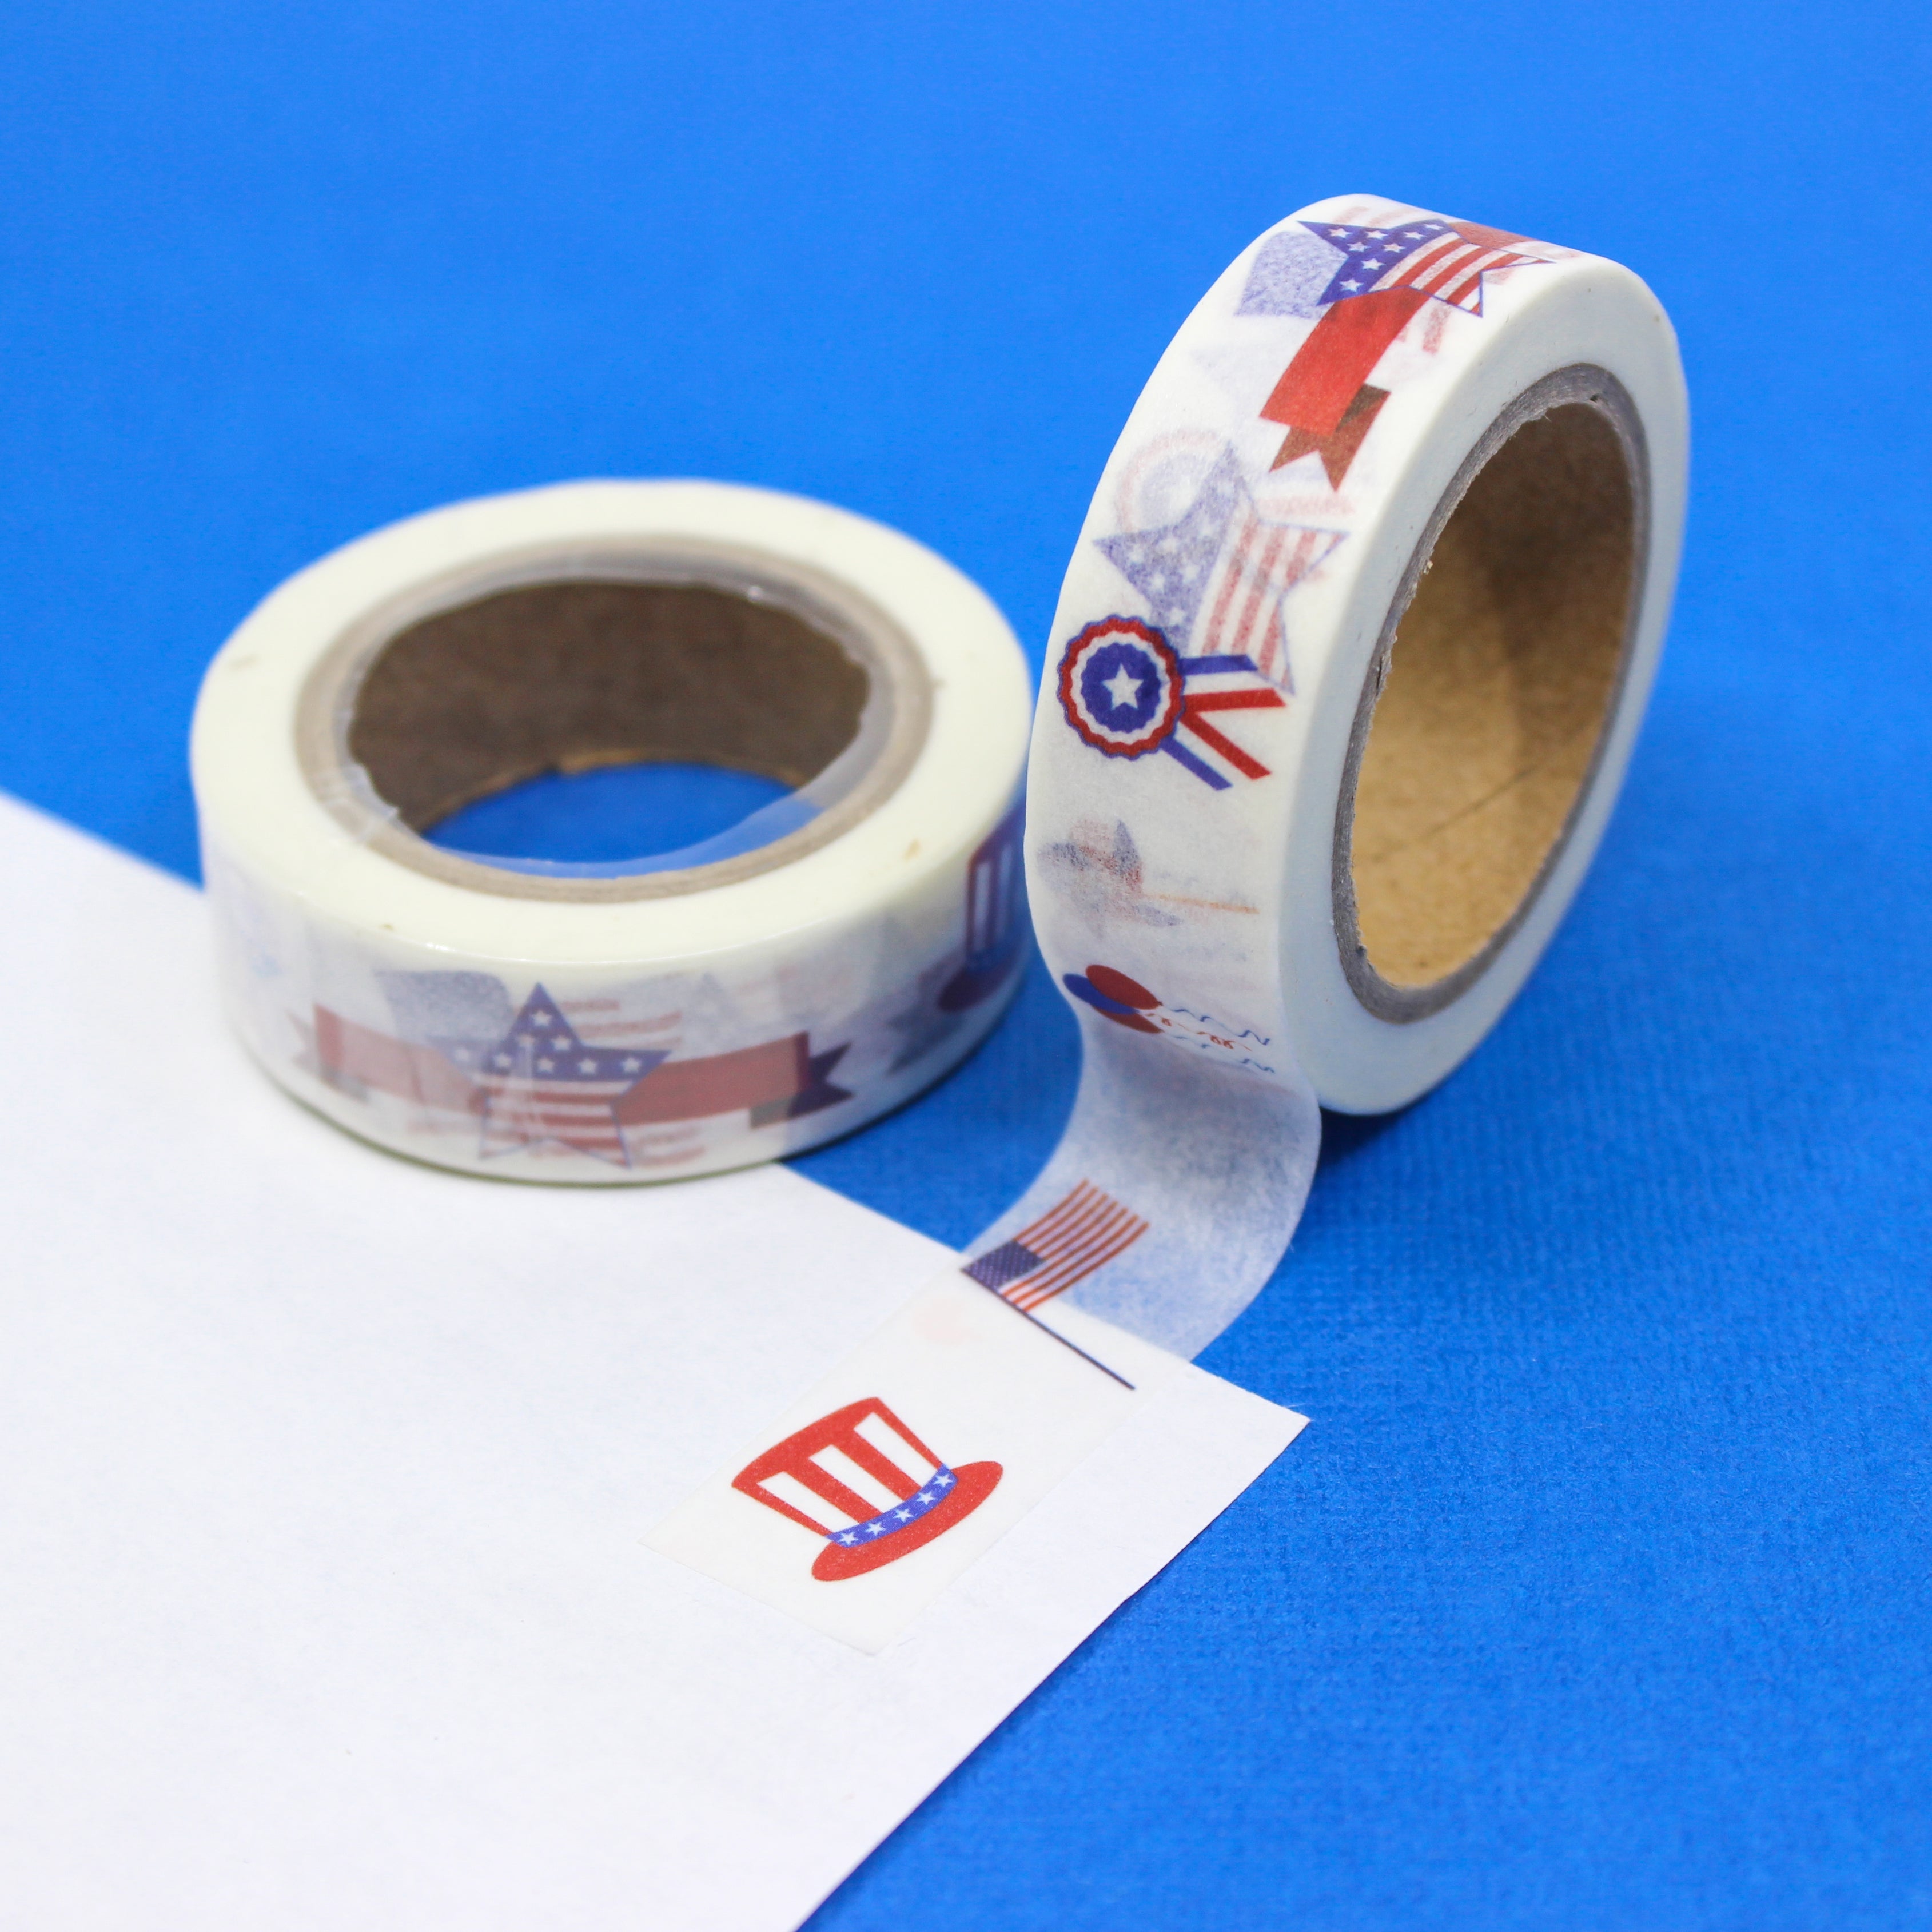 This is a gorgeous emblems of American symbols on the 4th of July celebration view themed washi tape from BBB Supplies Craft Shop